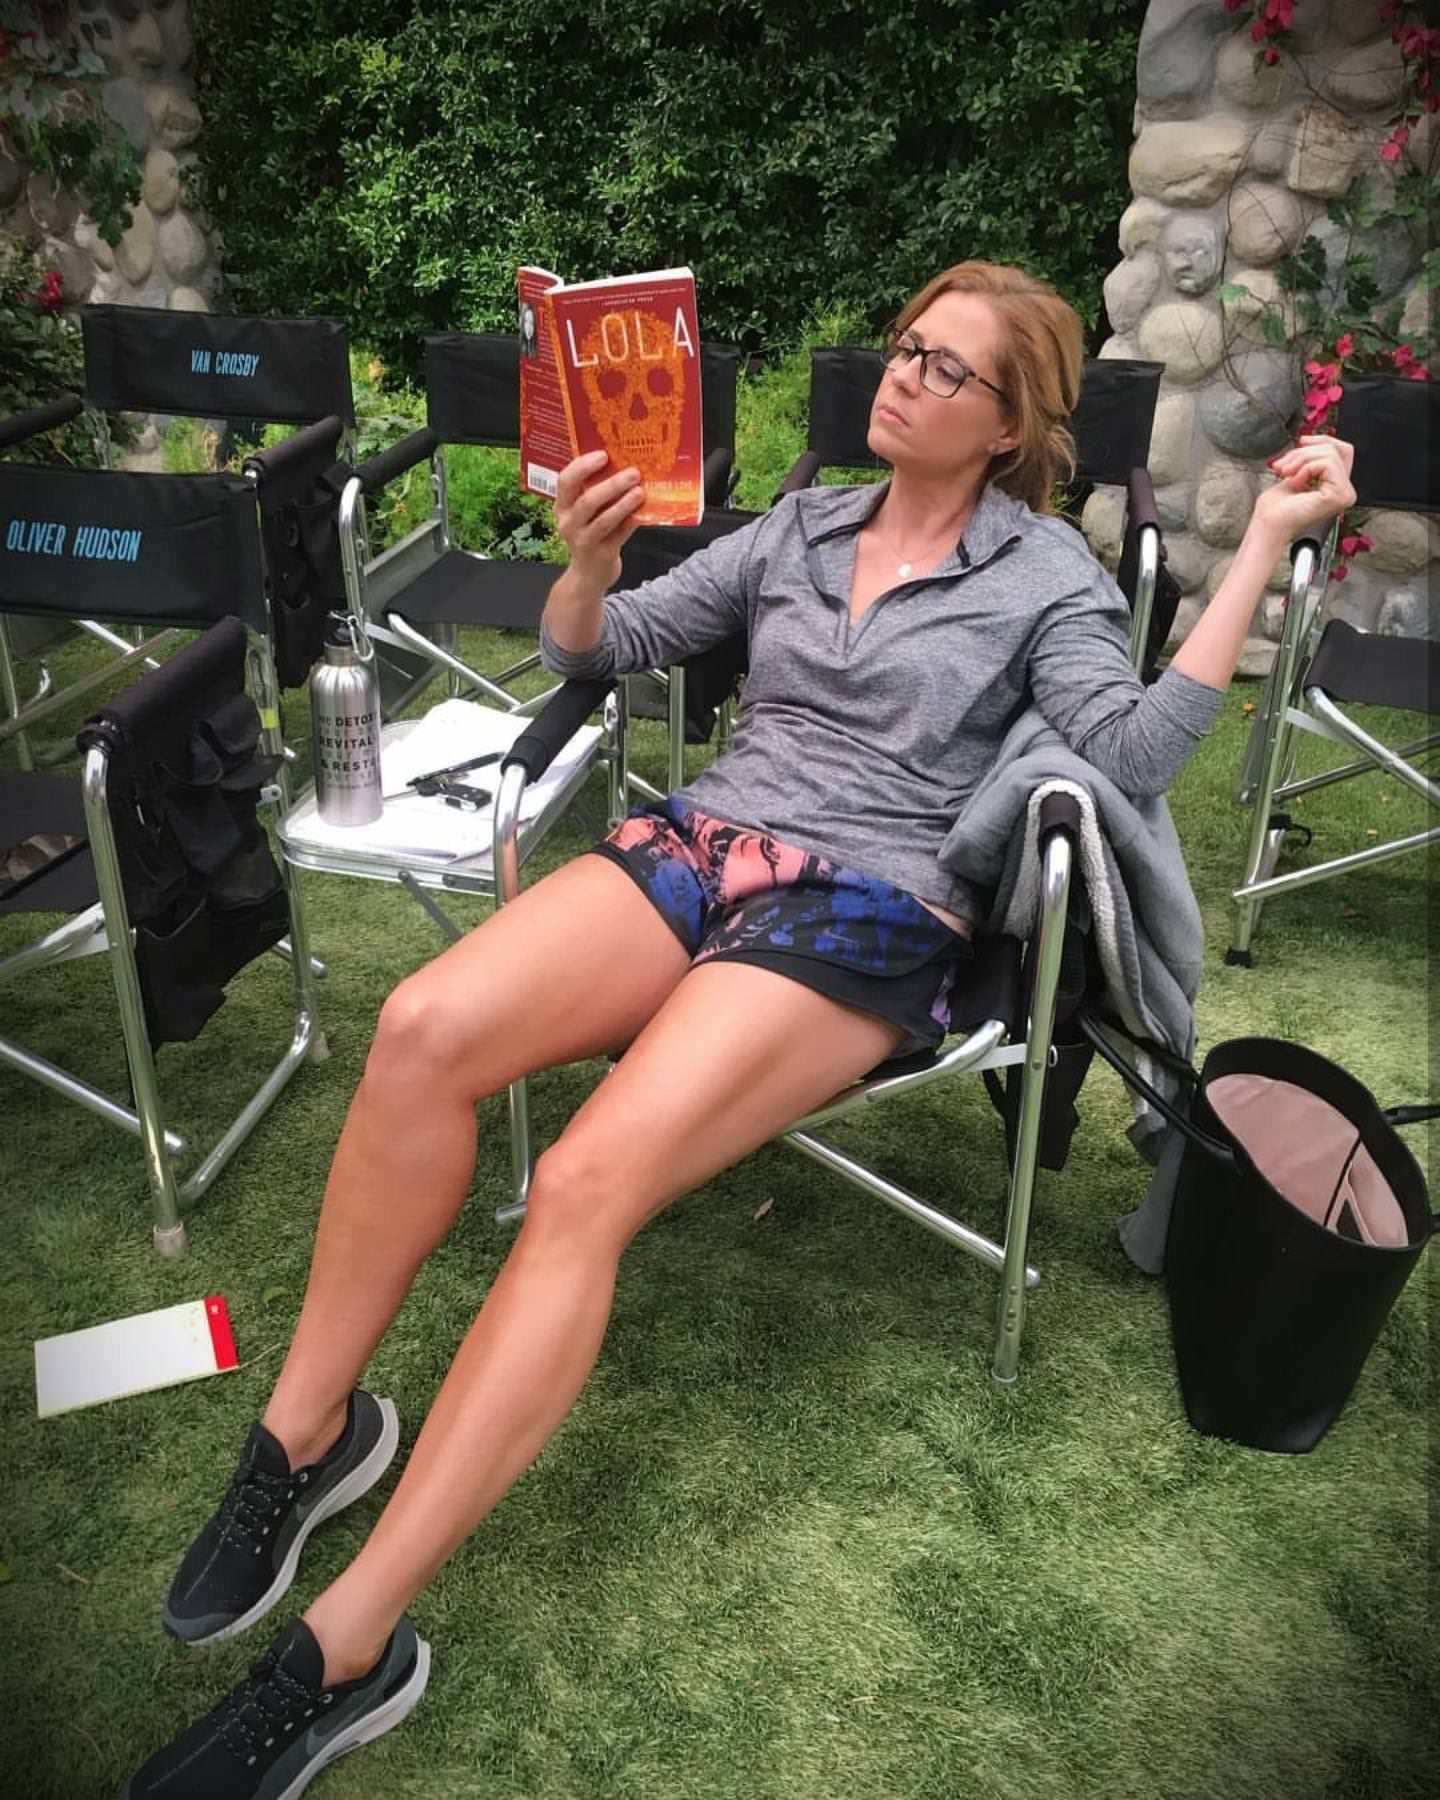 Jenna Fischer is the most amazing MILF. I wish I could suck on her mommy tits and worship her here. Any buds willing to help me blow for her?